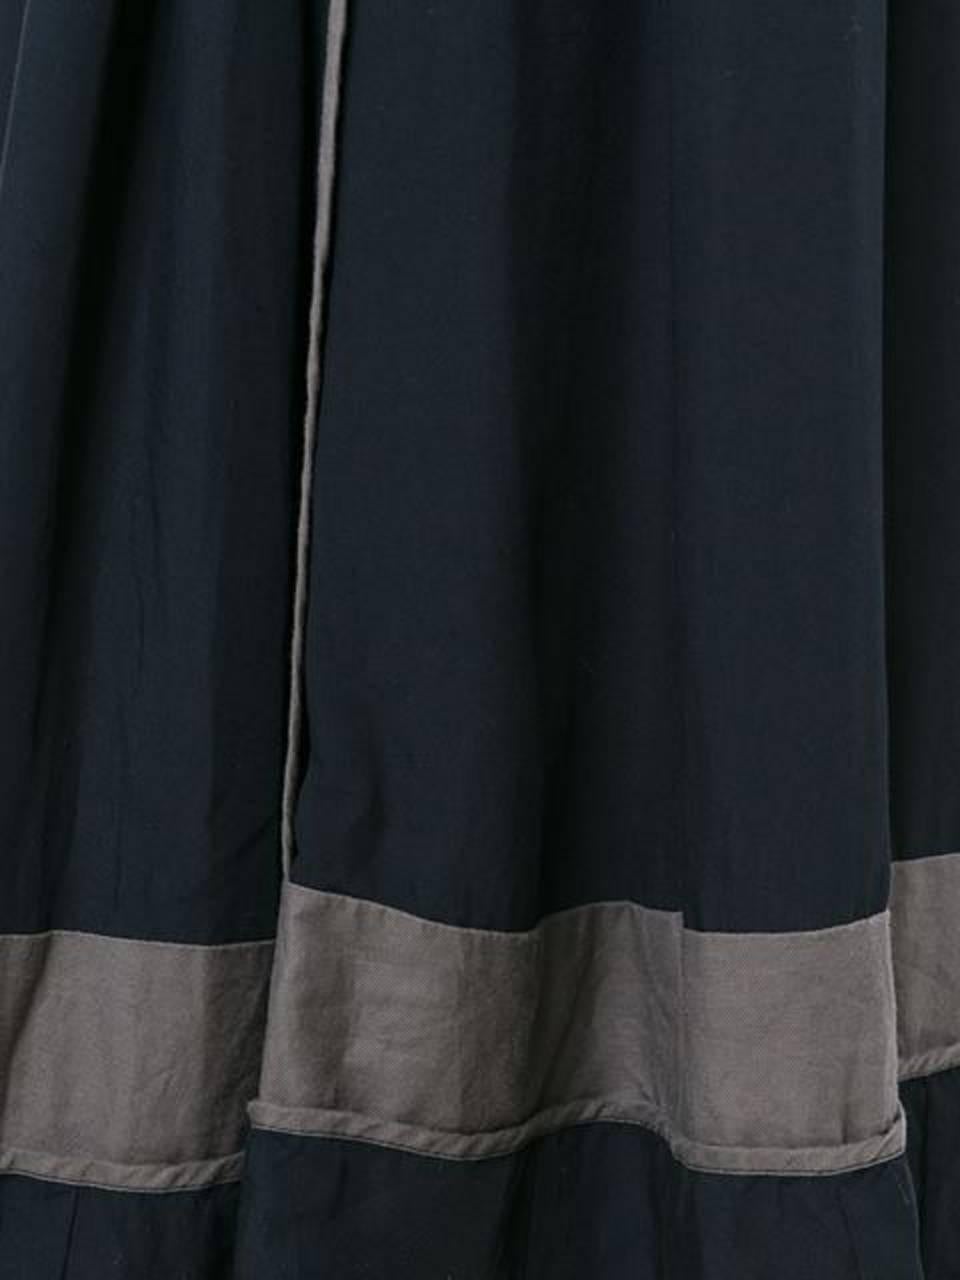 1998s Comme des Garcons taupe and navy blue two-tone pleated dress featuring taupe patches, a center back zip.
Rayon 100%
In excellent vintage condition. Made in Japan.
Label Size S
We guarantee you will receive this gorgeous item as described and